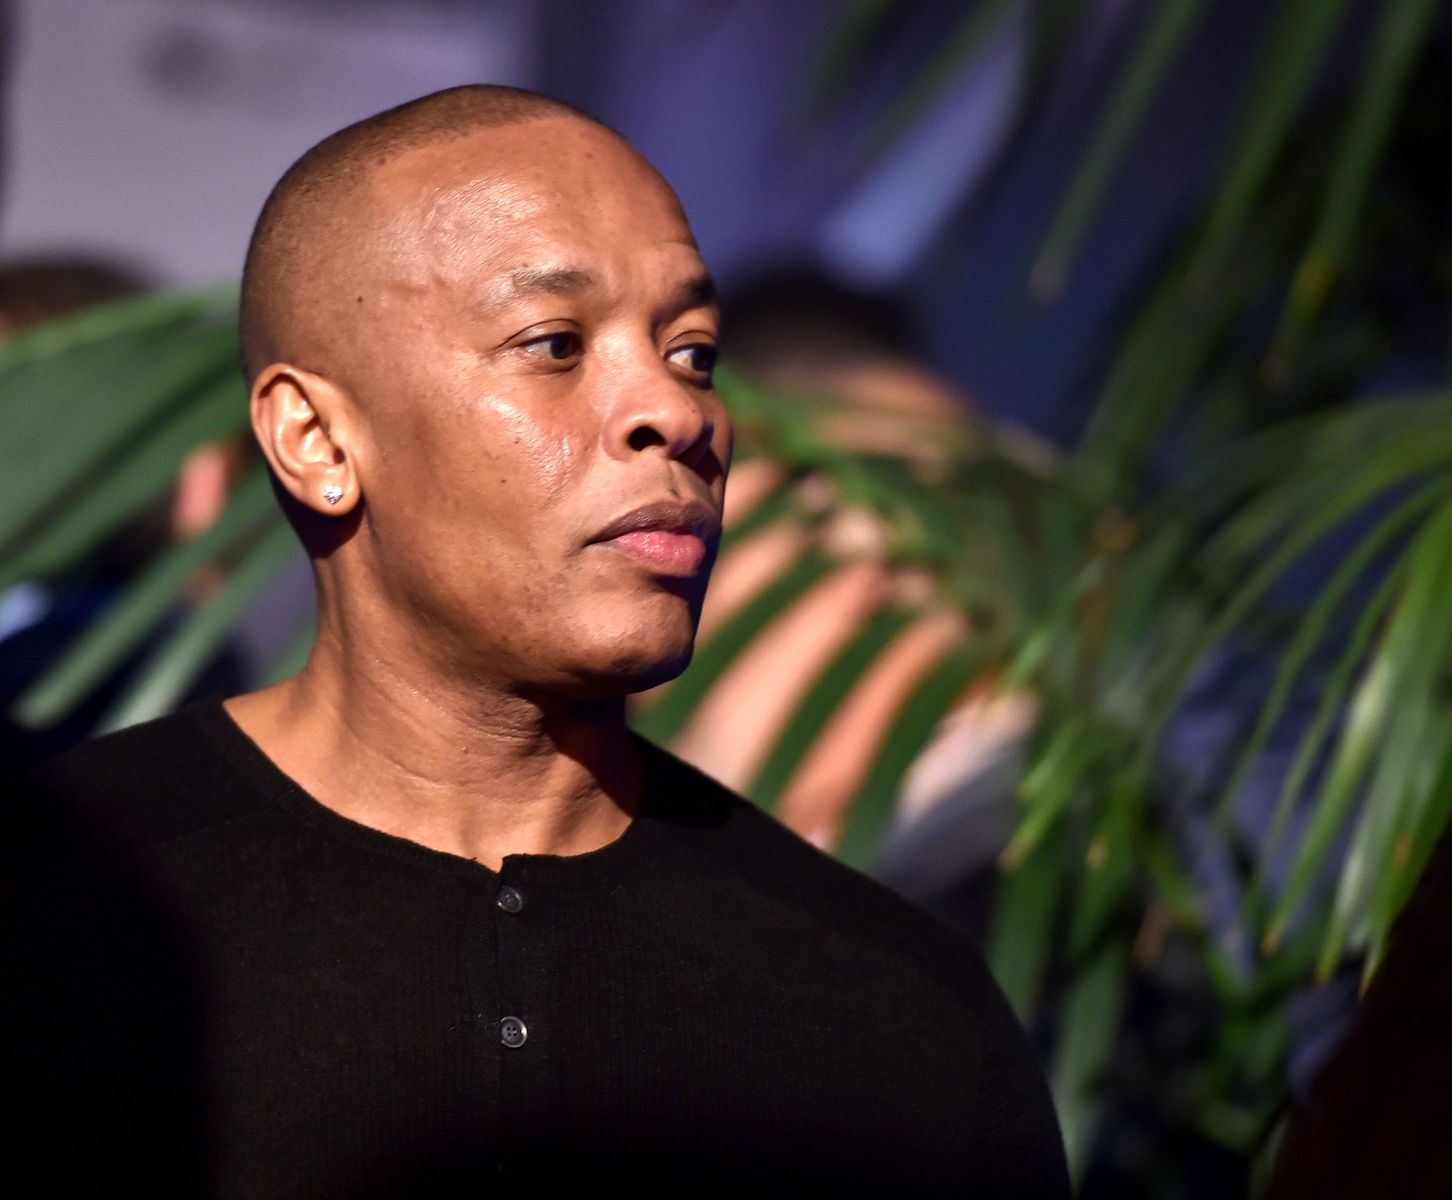 Dr. Dre at the after-party for the premiere of "Straight Outta Compton" on August 10, 2015, in Los Angeles, California | Photo: Kevin Winter/Getty Images